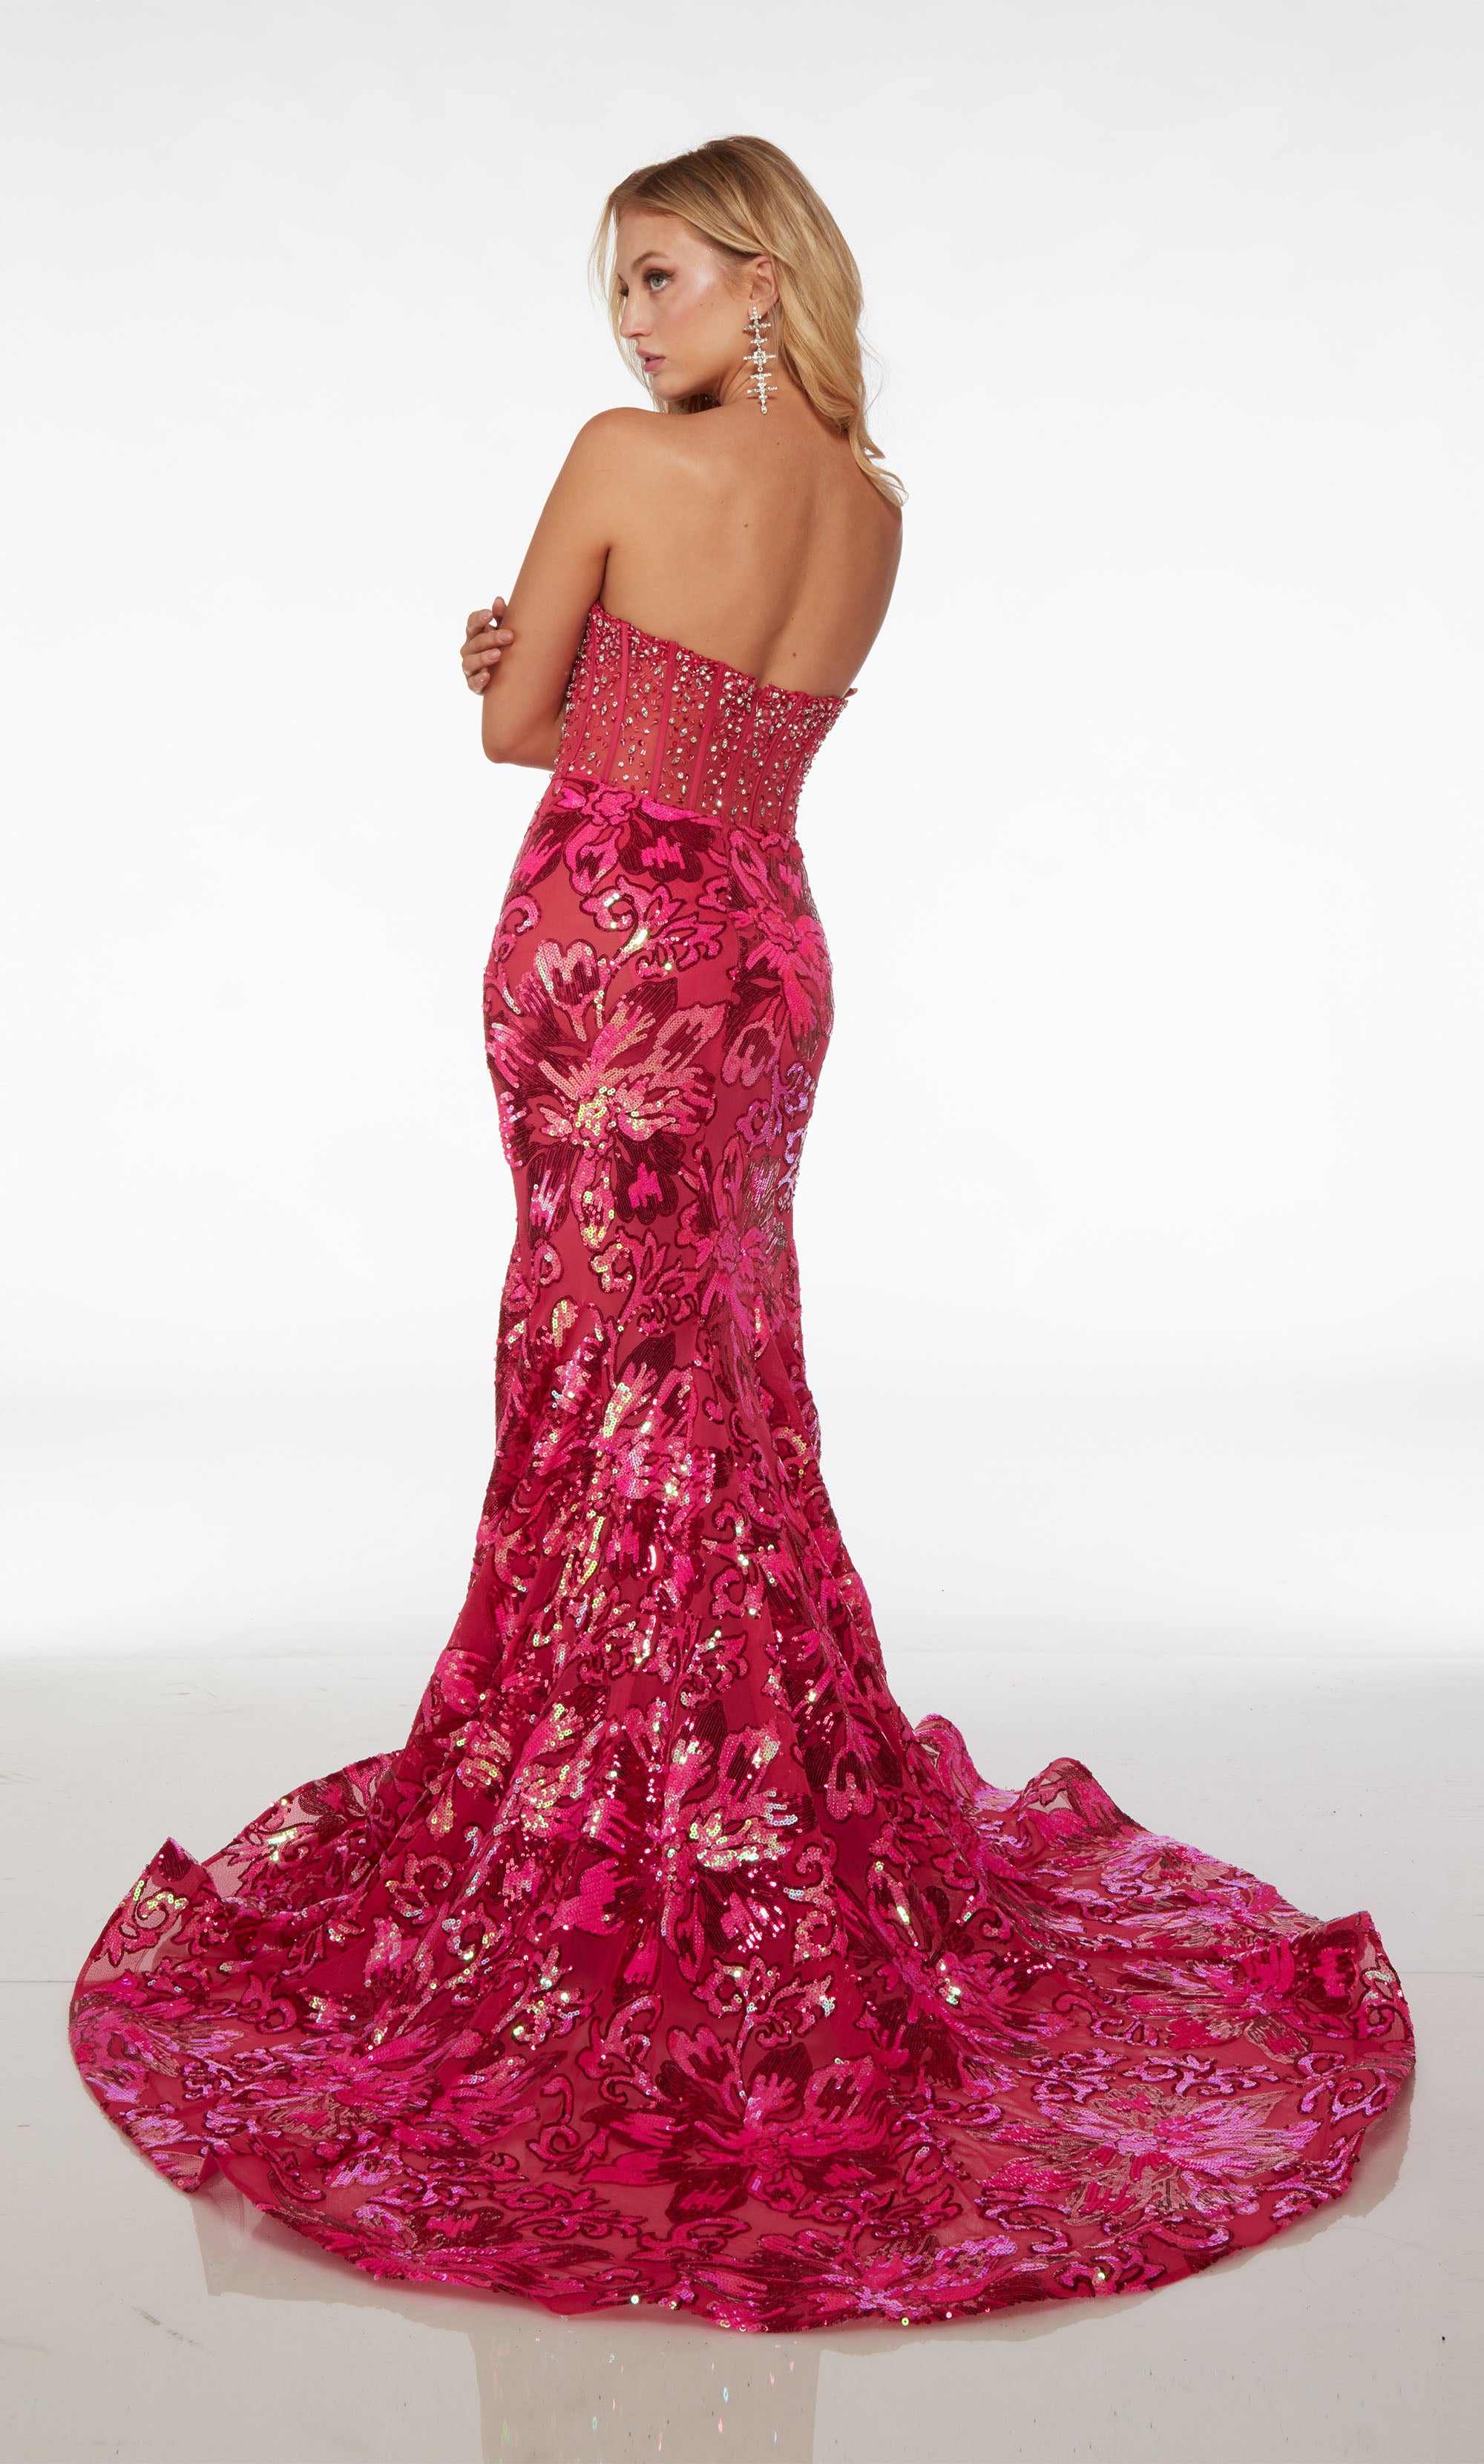 Stunning strapless mermaid dress featuring an sheer rhinestone-embellished corset top and an floral sequin skirt with an gracefully long train.